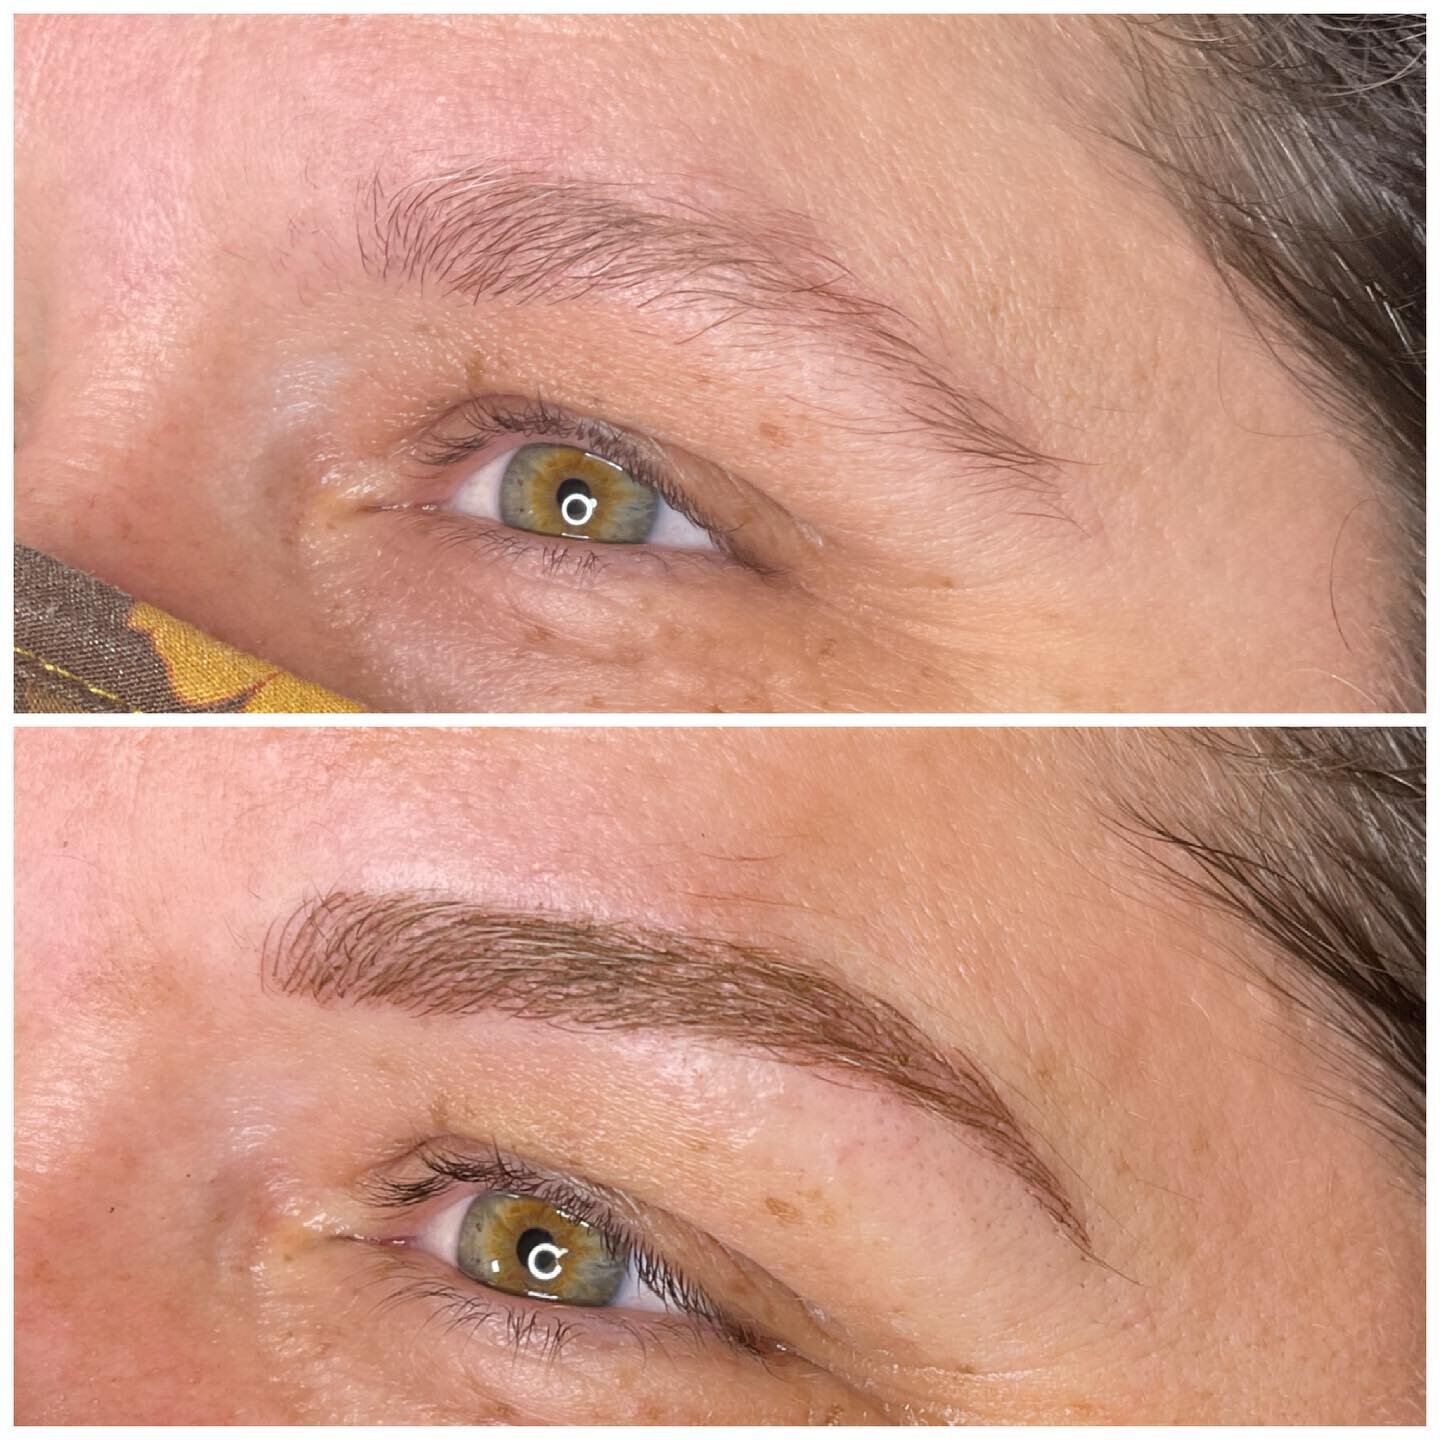 I really enjoyed doing this beautiful lady&rsquo;s brows today.  She wanted hairstrokes with shading so I went for a really natural combination.  The difference a good brow shape can make to someone&rsquo;s face never ceases to amaze me.  Im so disap